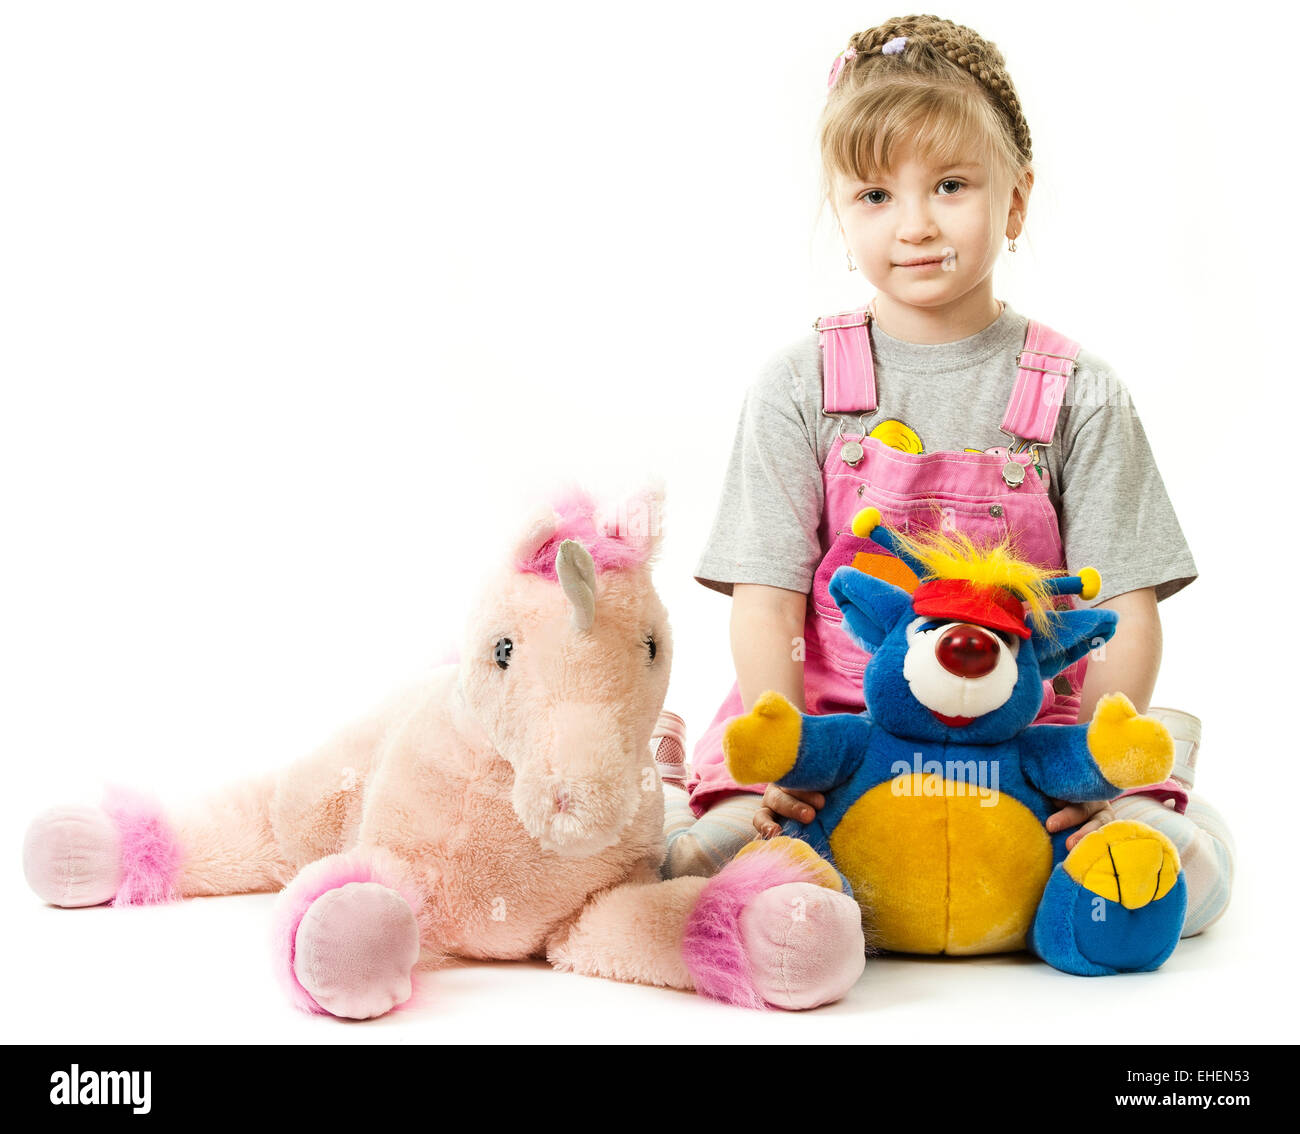 Girl surrounded by her toys Stock Photo